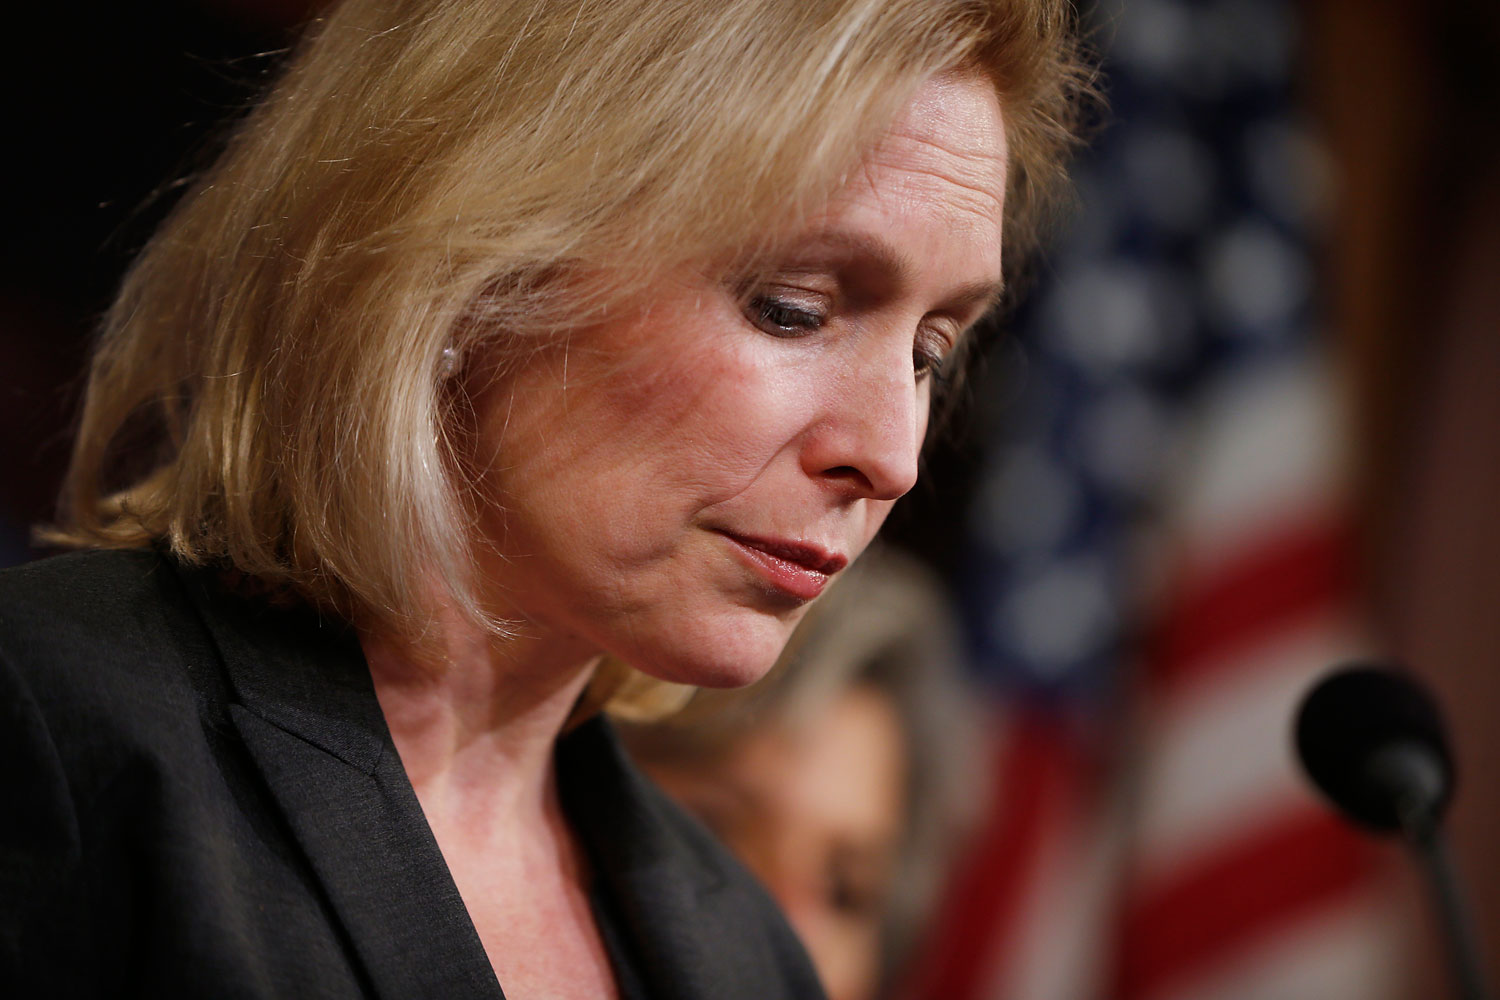 Senator Kirsten Gillibrand, a New York Democrat, pauses while speaking at a news conference on Capitol Hill in Washington on March 6, 2014, following a Senate vote on military sexual assaults (Charles Dharapak&amp;mdash;AP)